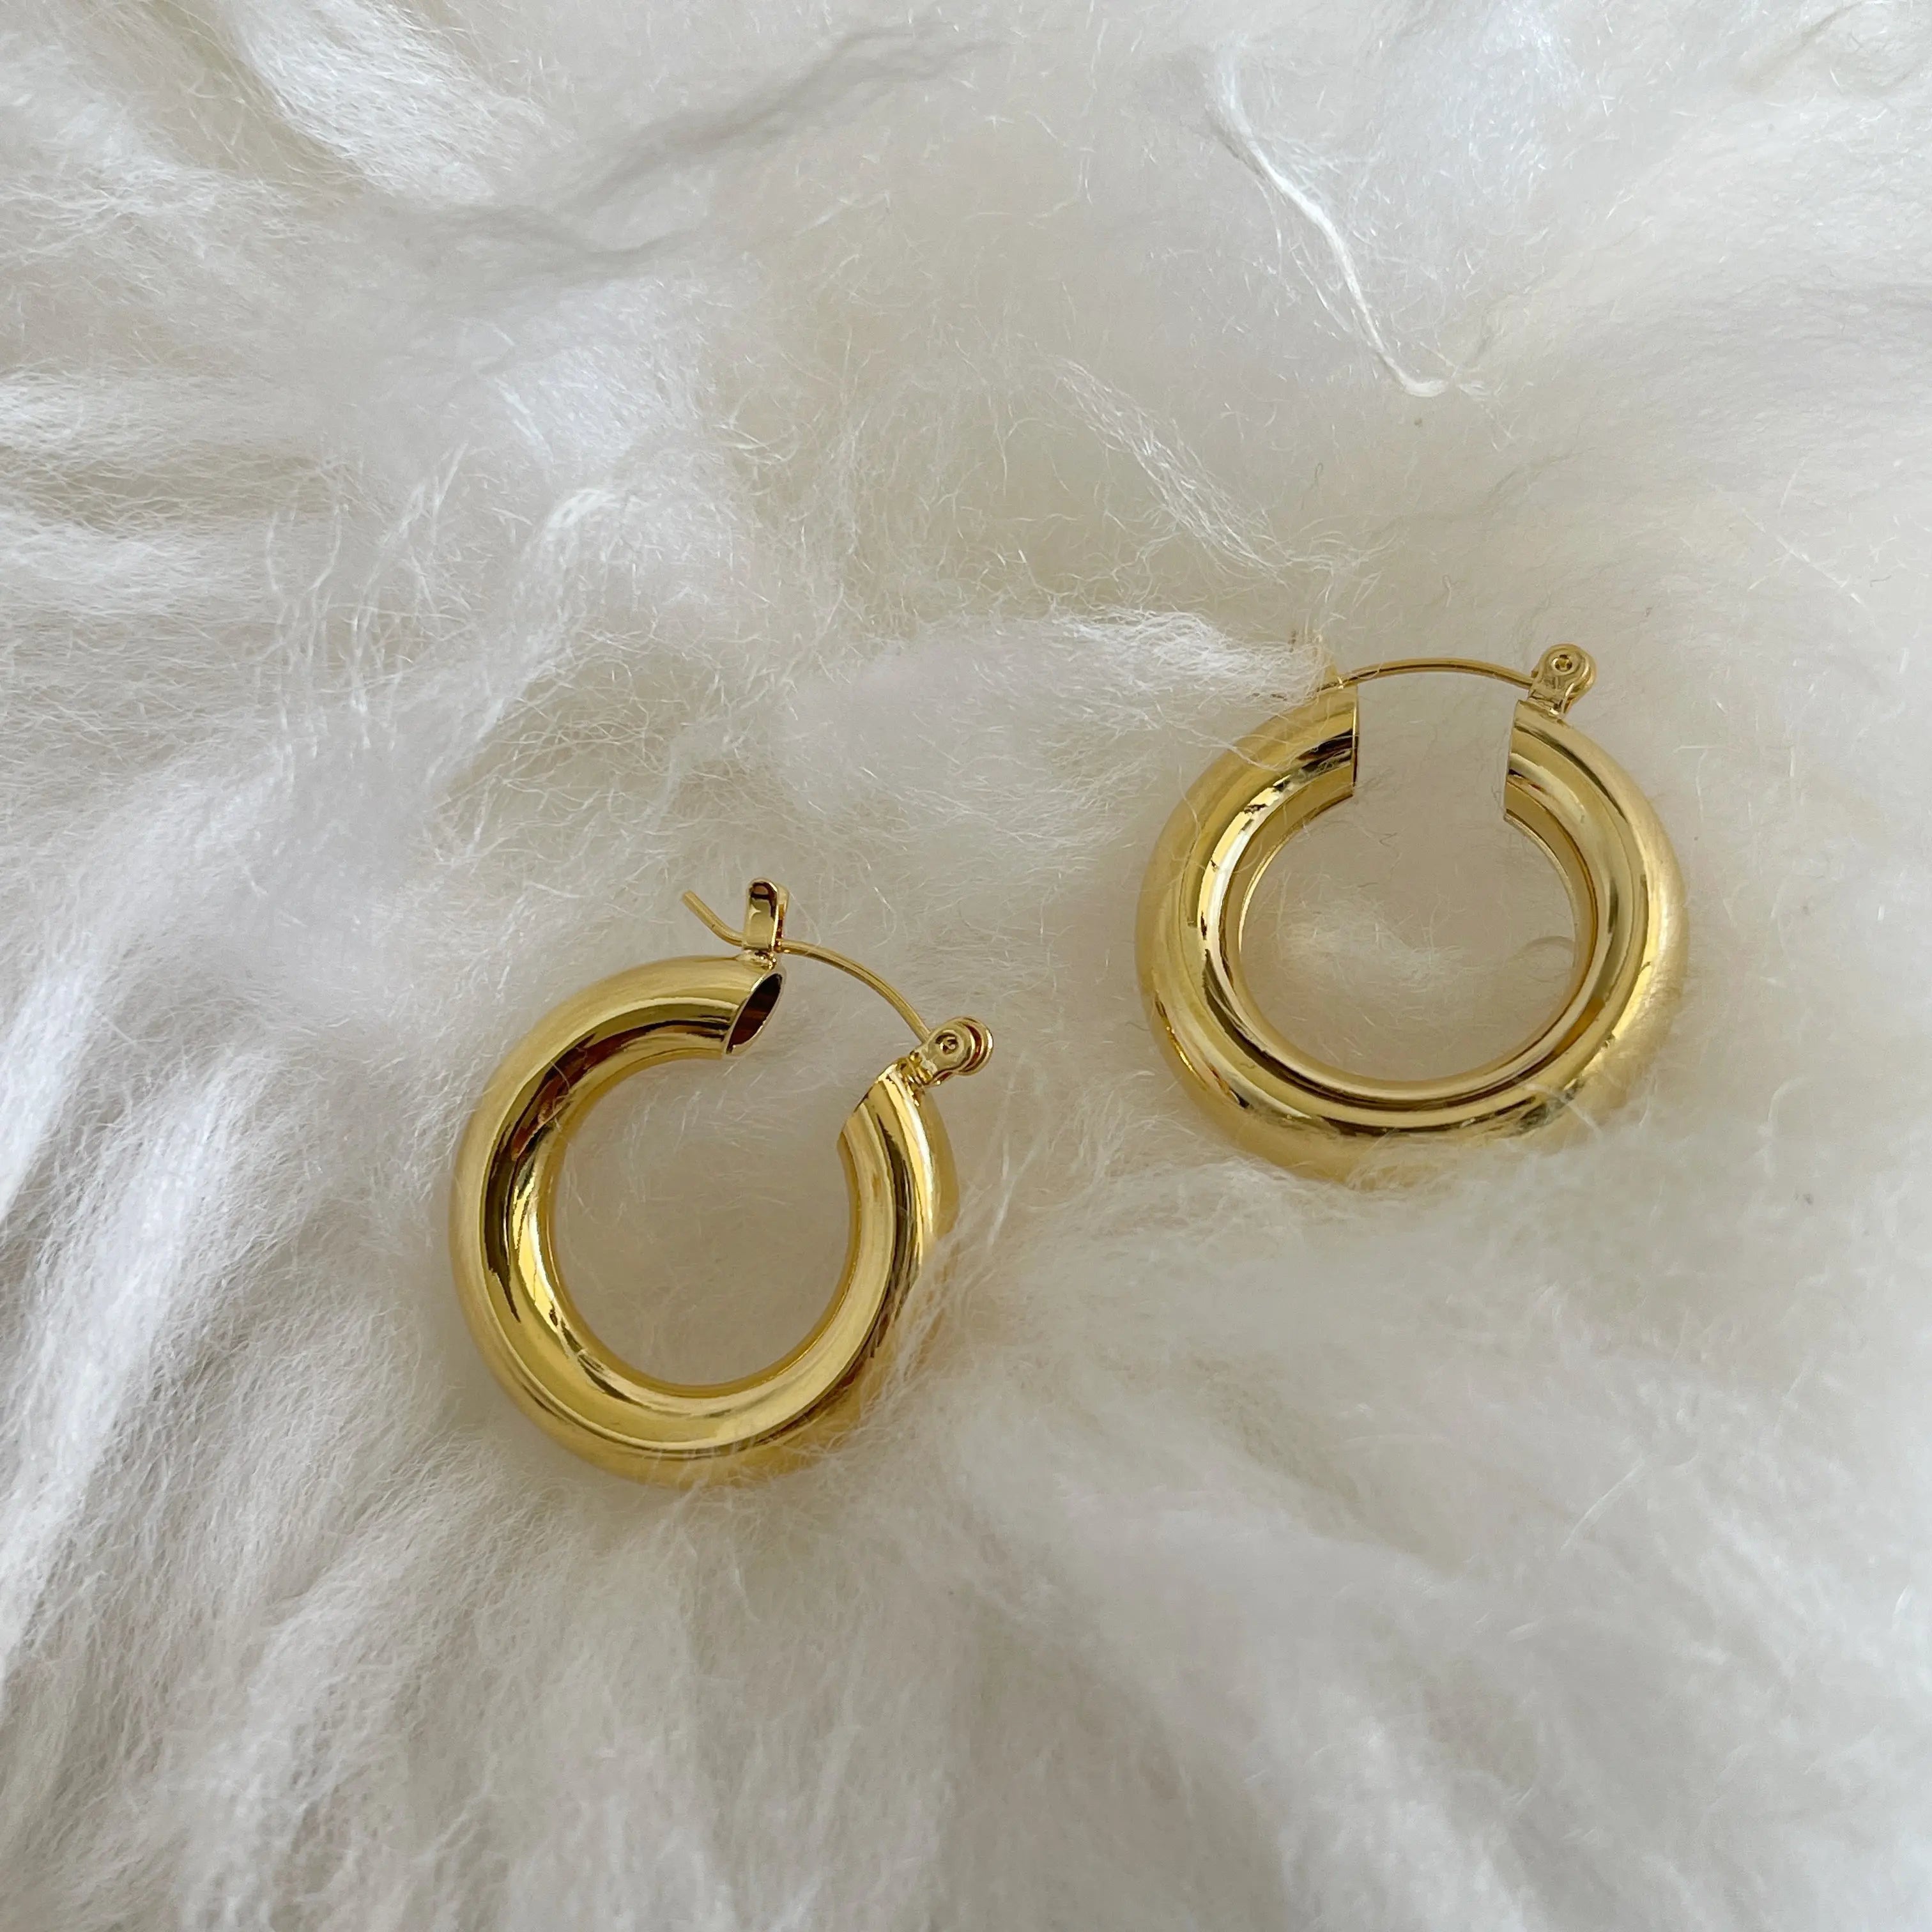 TStylish and Water-Resistant Gold Plated earrings- Perfect timeless necessary for every occasion